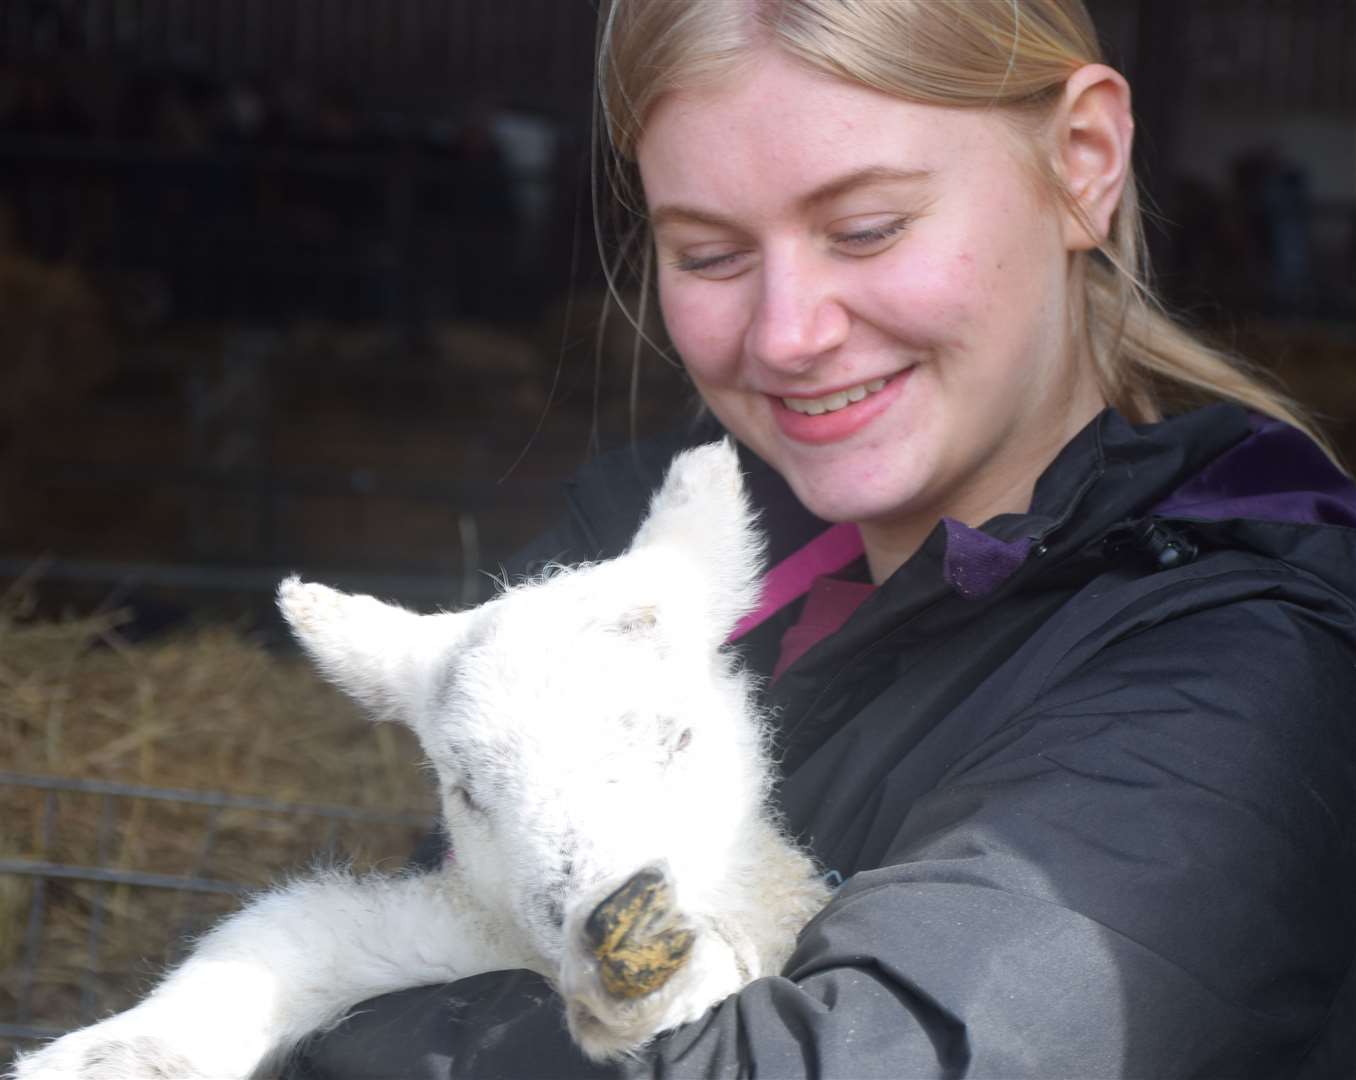 Visitors will get a chance to see the lambs up close in the lambing shed - you might even get to see one being born there if you’re lucky. Picture: Hadlow College